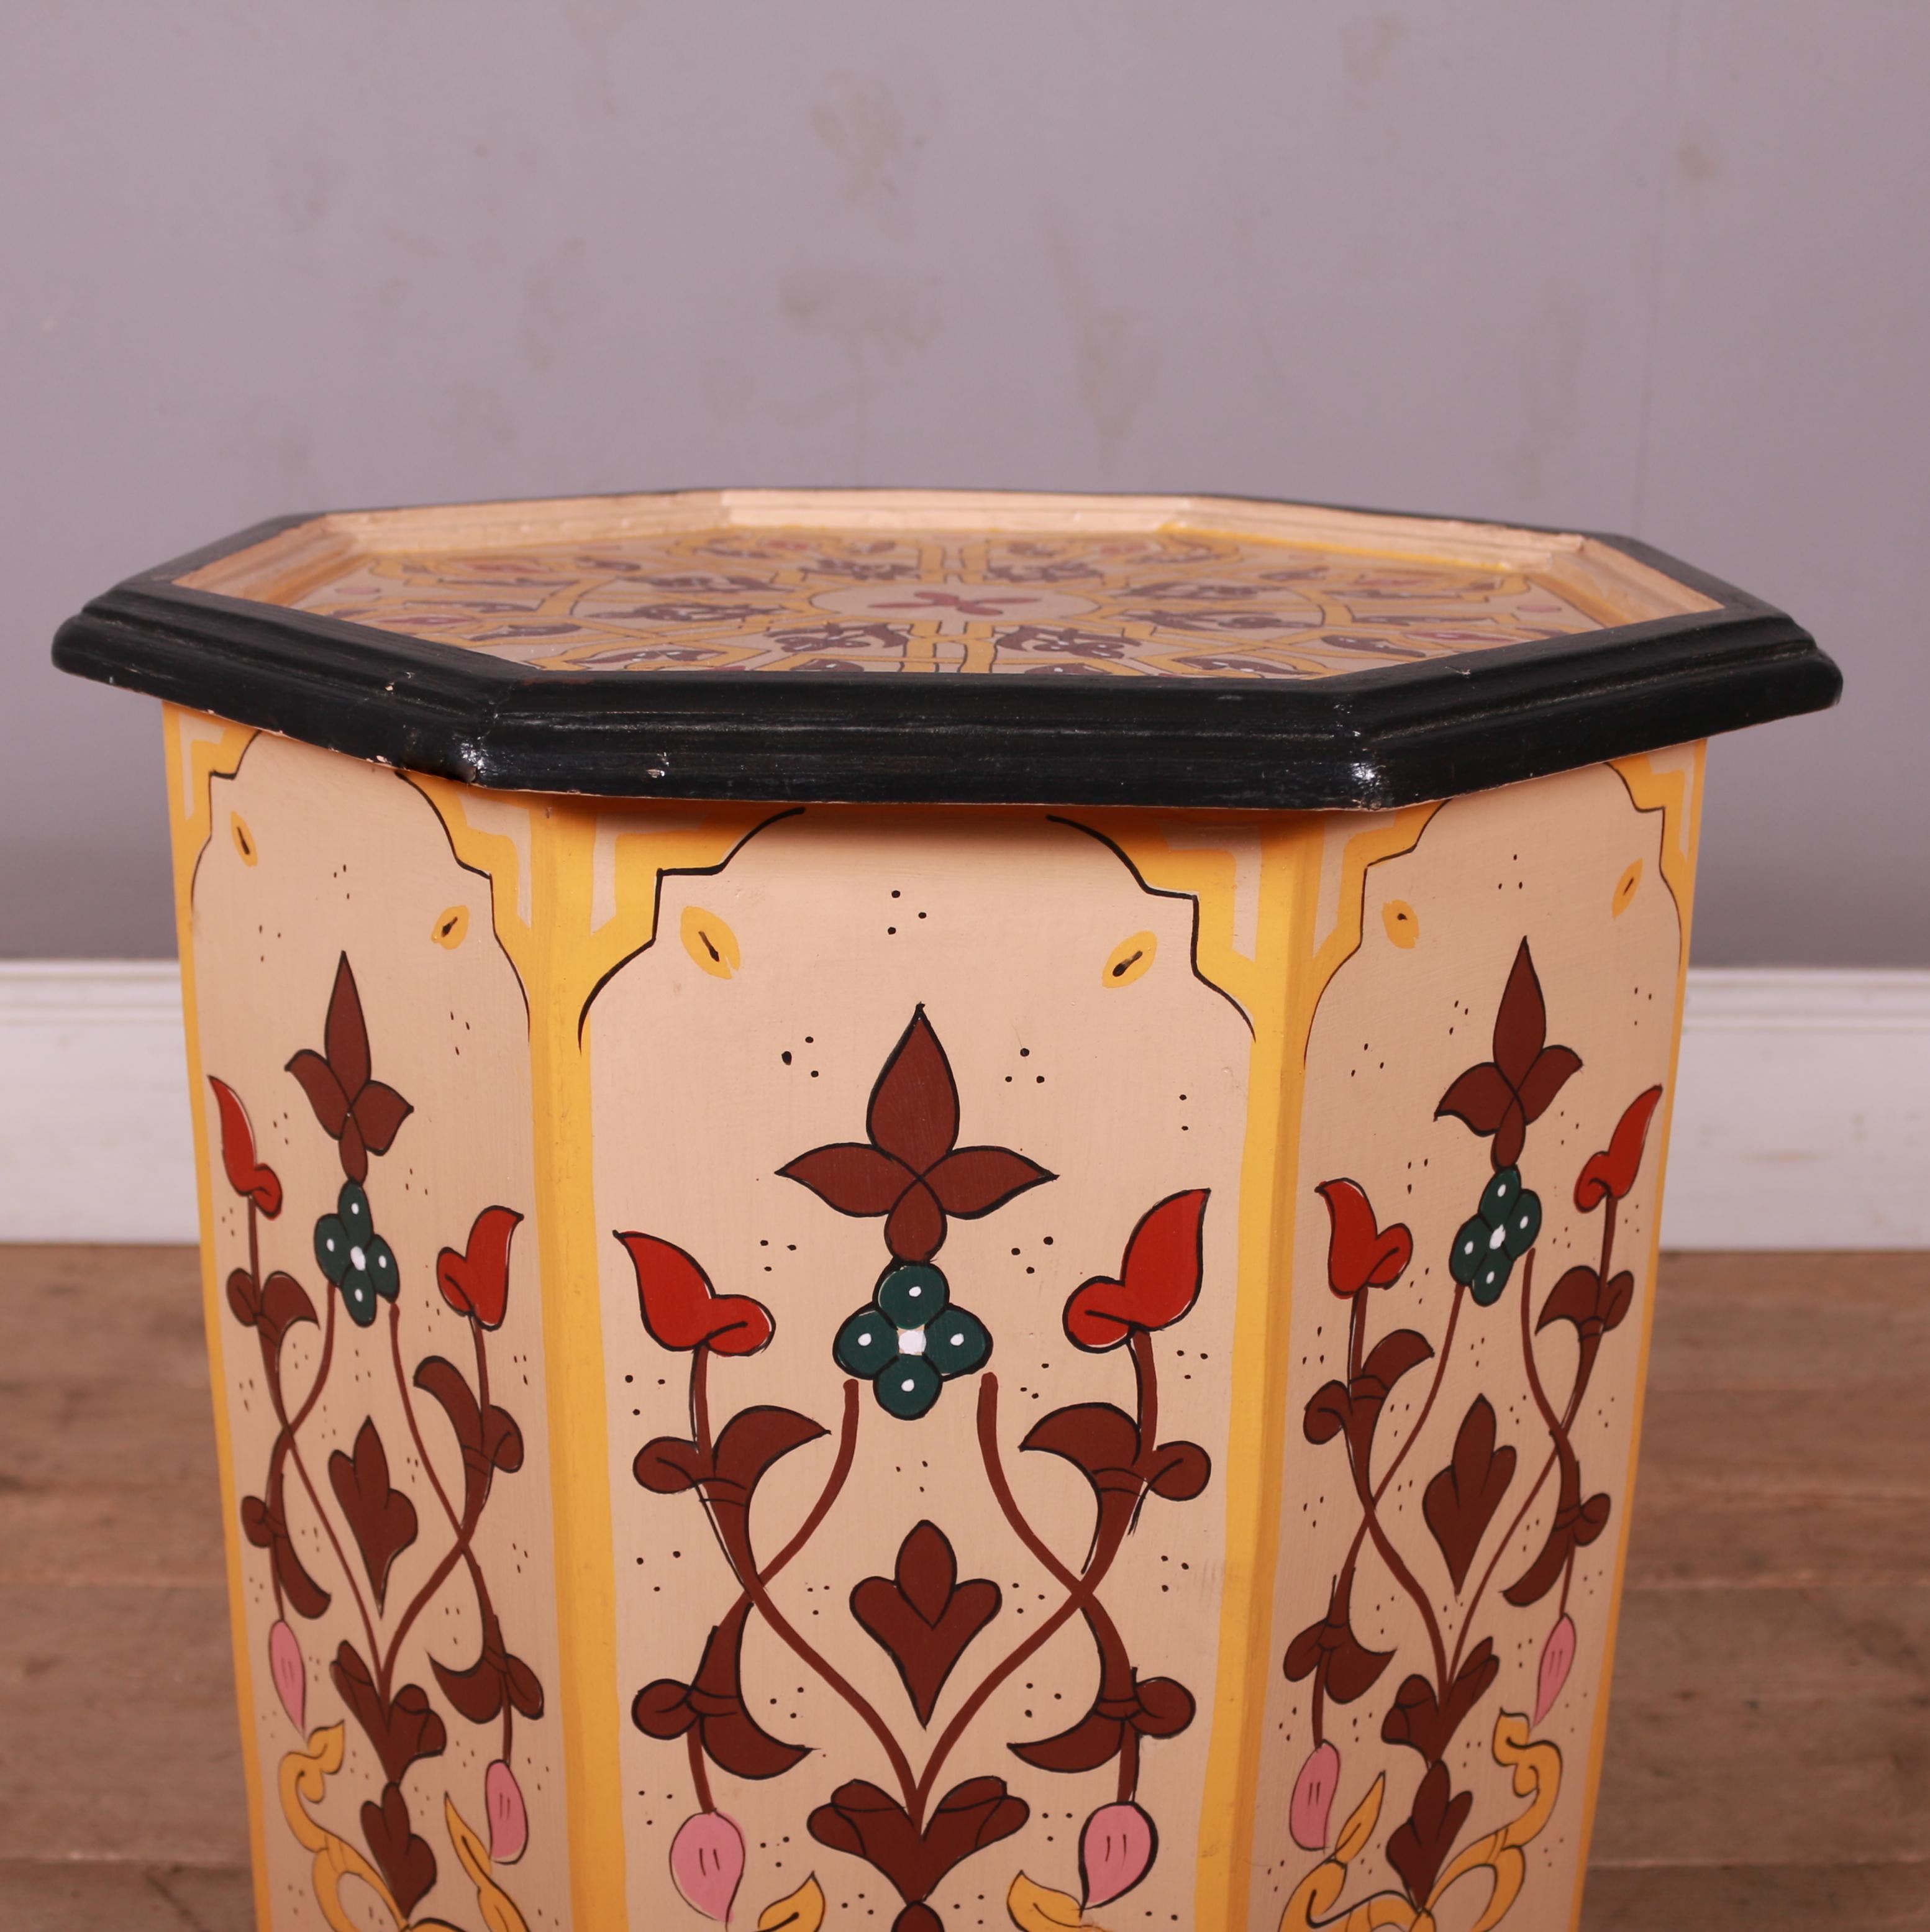 Bespoke hand-painted Moroccan side table.

This is imported directly from Morocco and can be made to your specification.

Reference: 7330.

Dimensions
20 inches (51 cms) High
17.5 inches (44 cms) Diameter